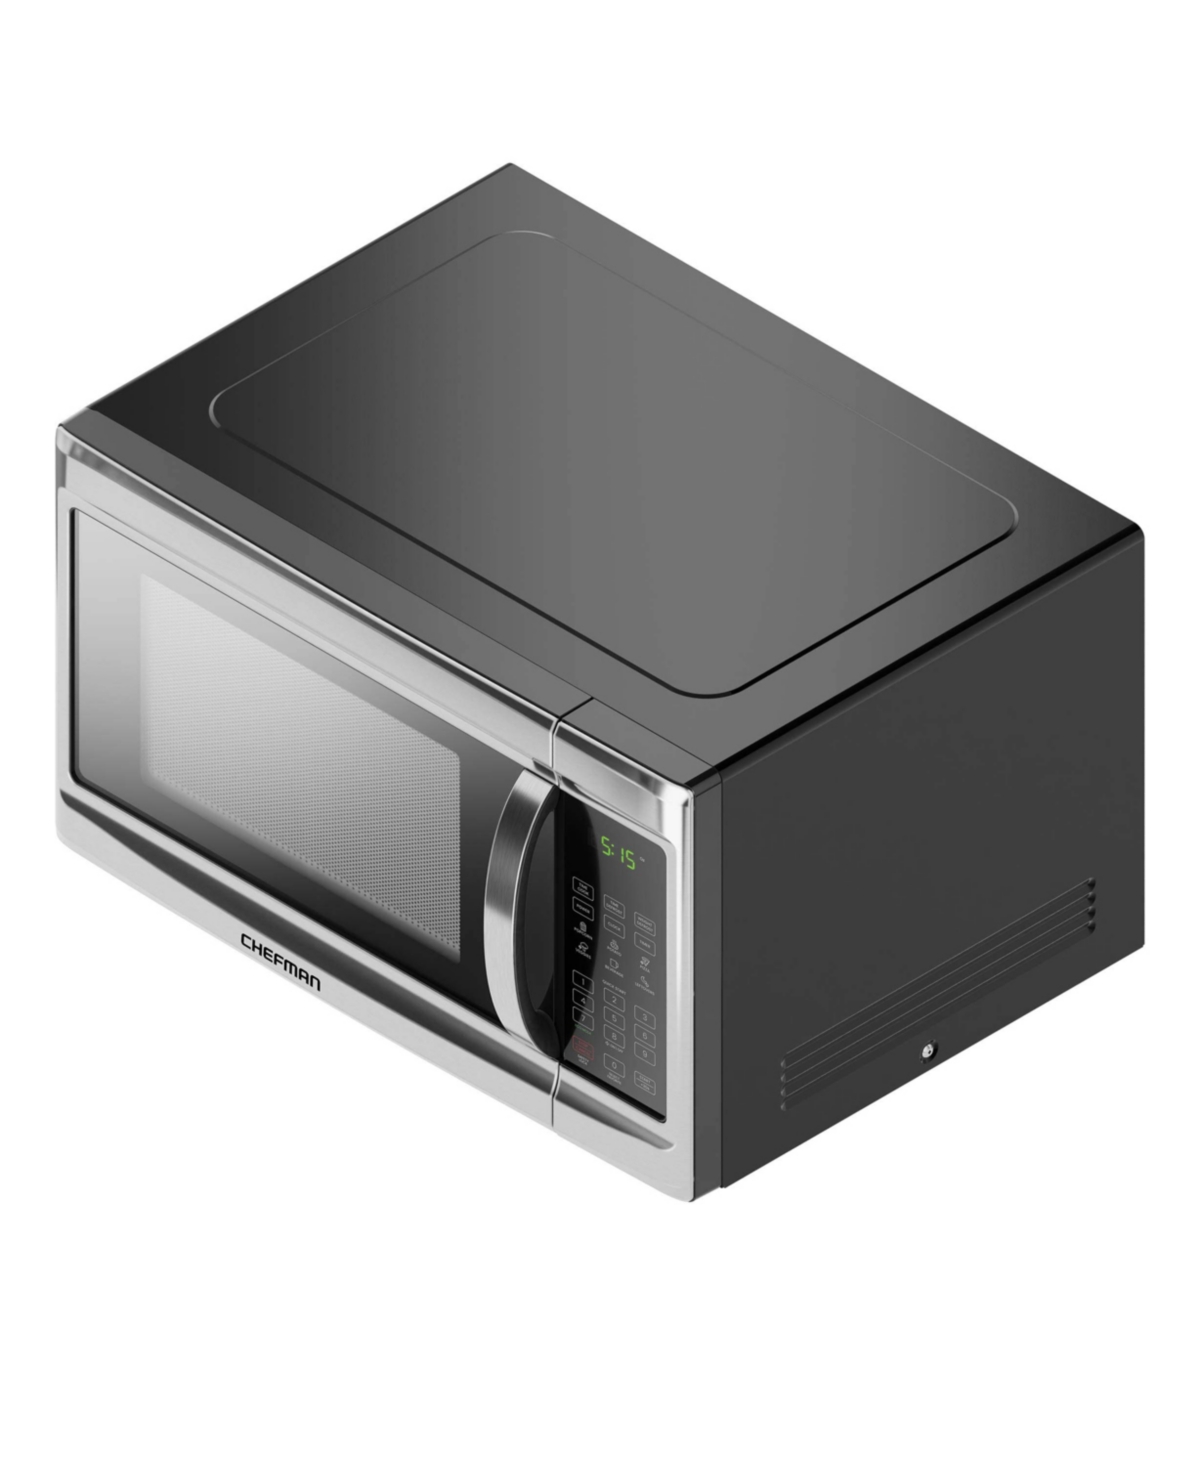 Shop Chefman .1.3 Cubic Feet Microwave In Stainless